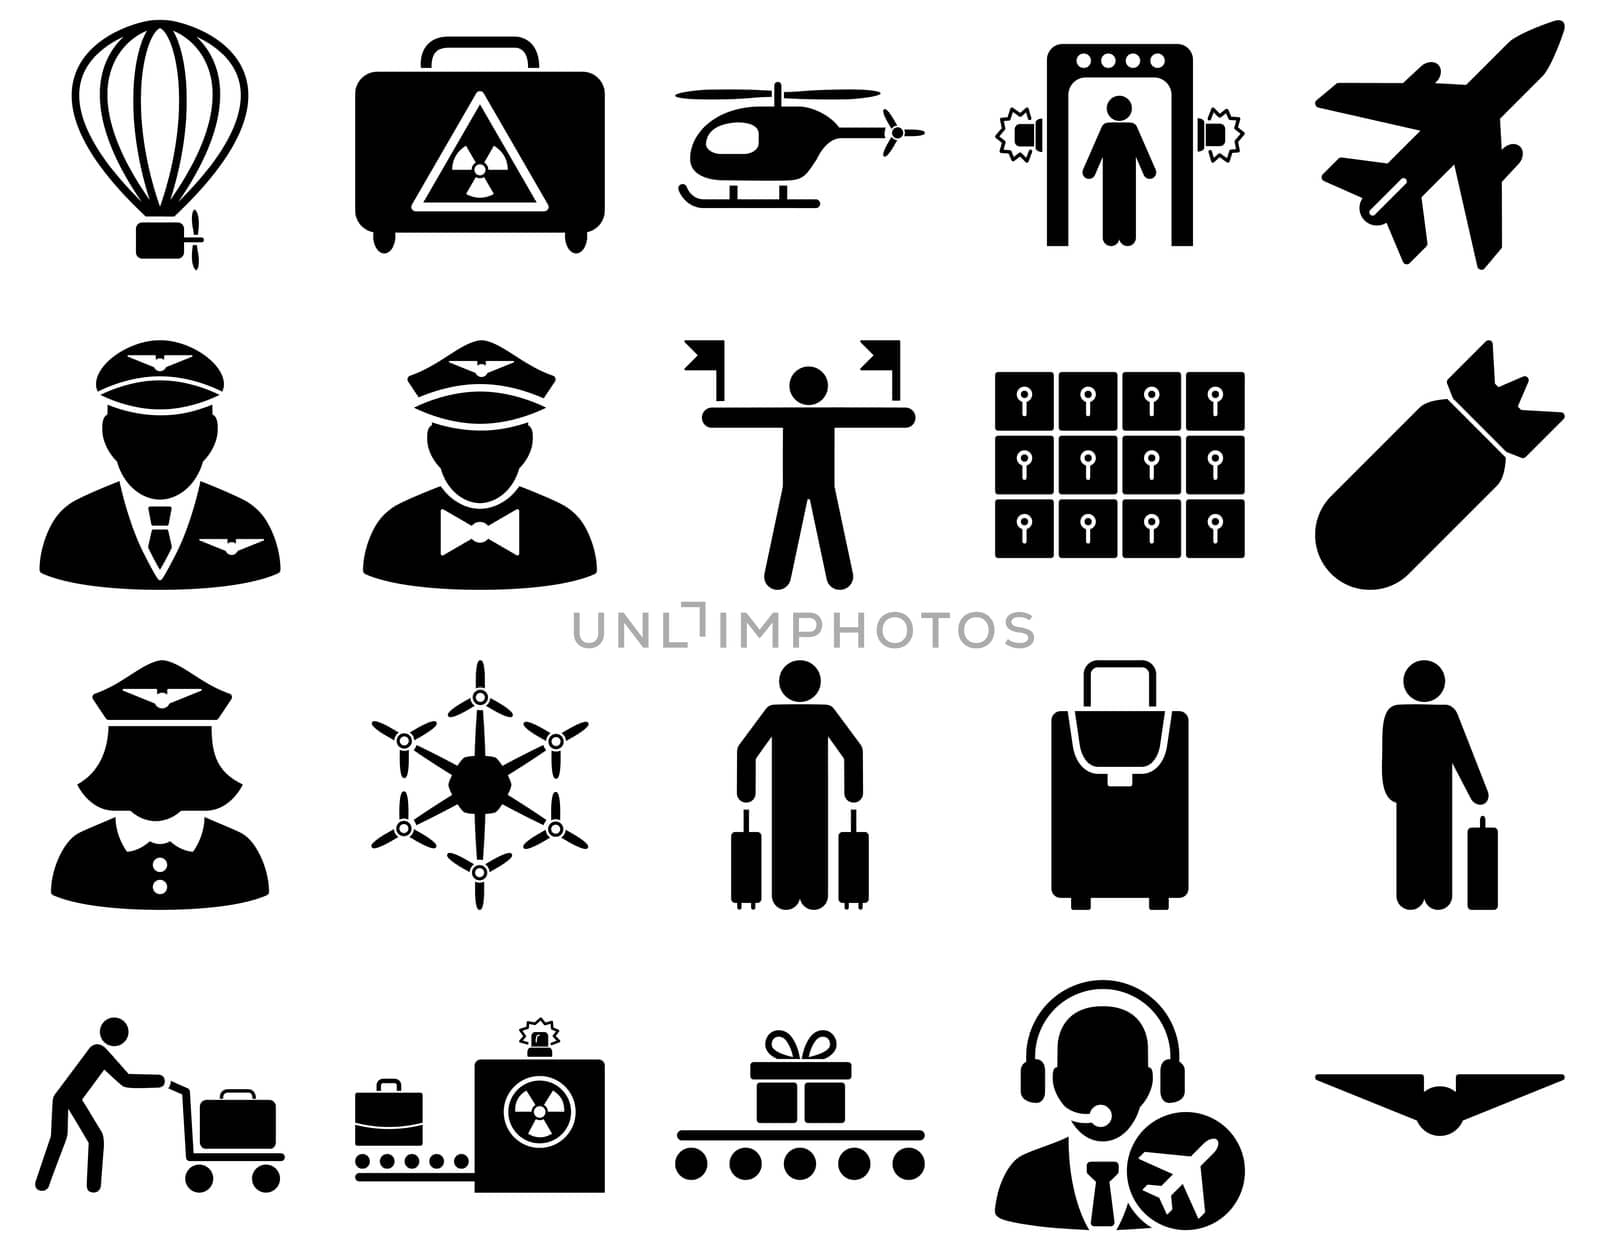 Airport Icon Set. These flat icons use black color. Raster images are isolated on a white background.